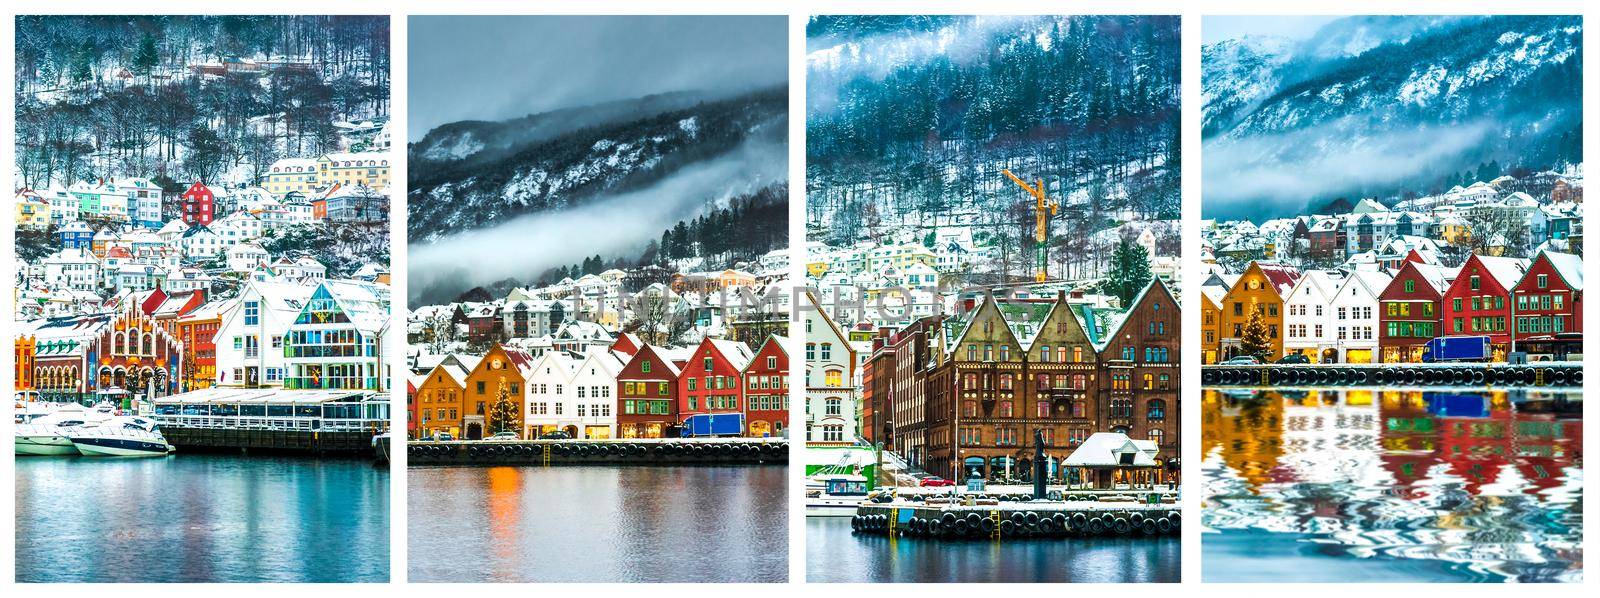 Watercolor paintings set of town Bergen, Norway with colorful buildings. Beautiful aquarelle drawings with cityscape